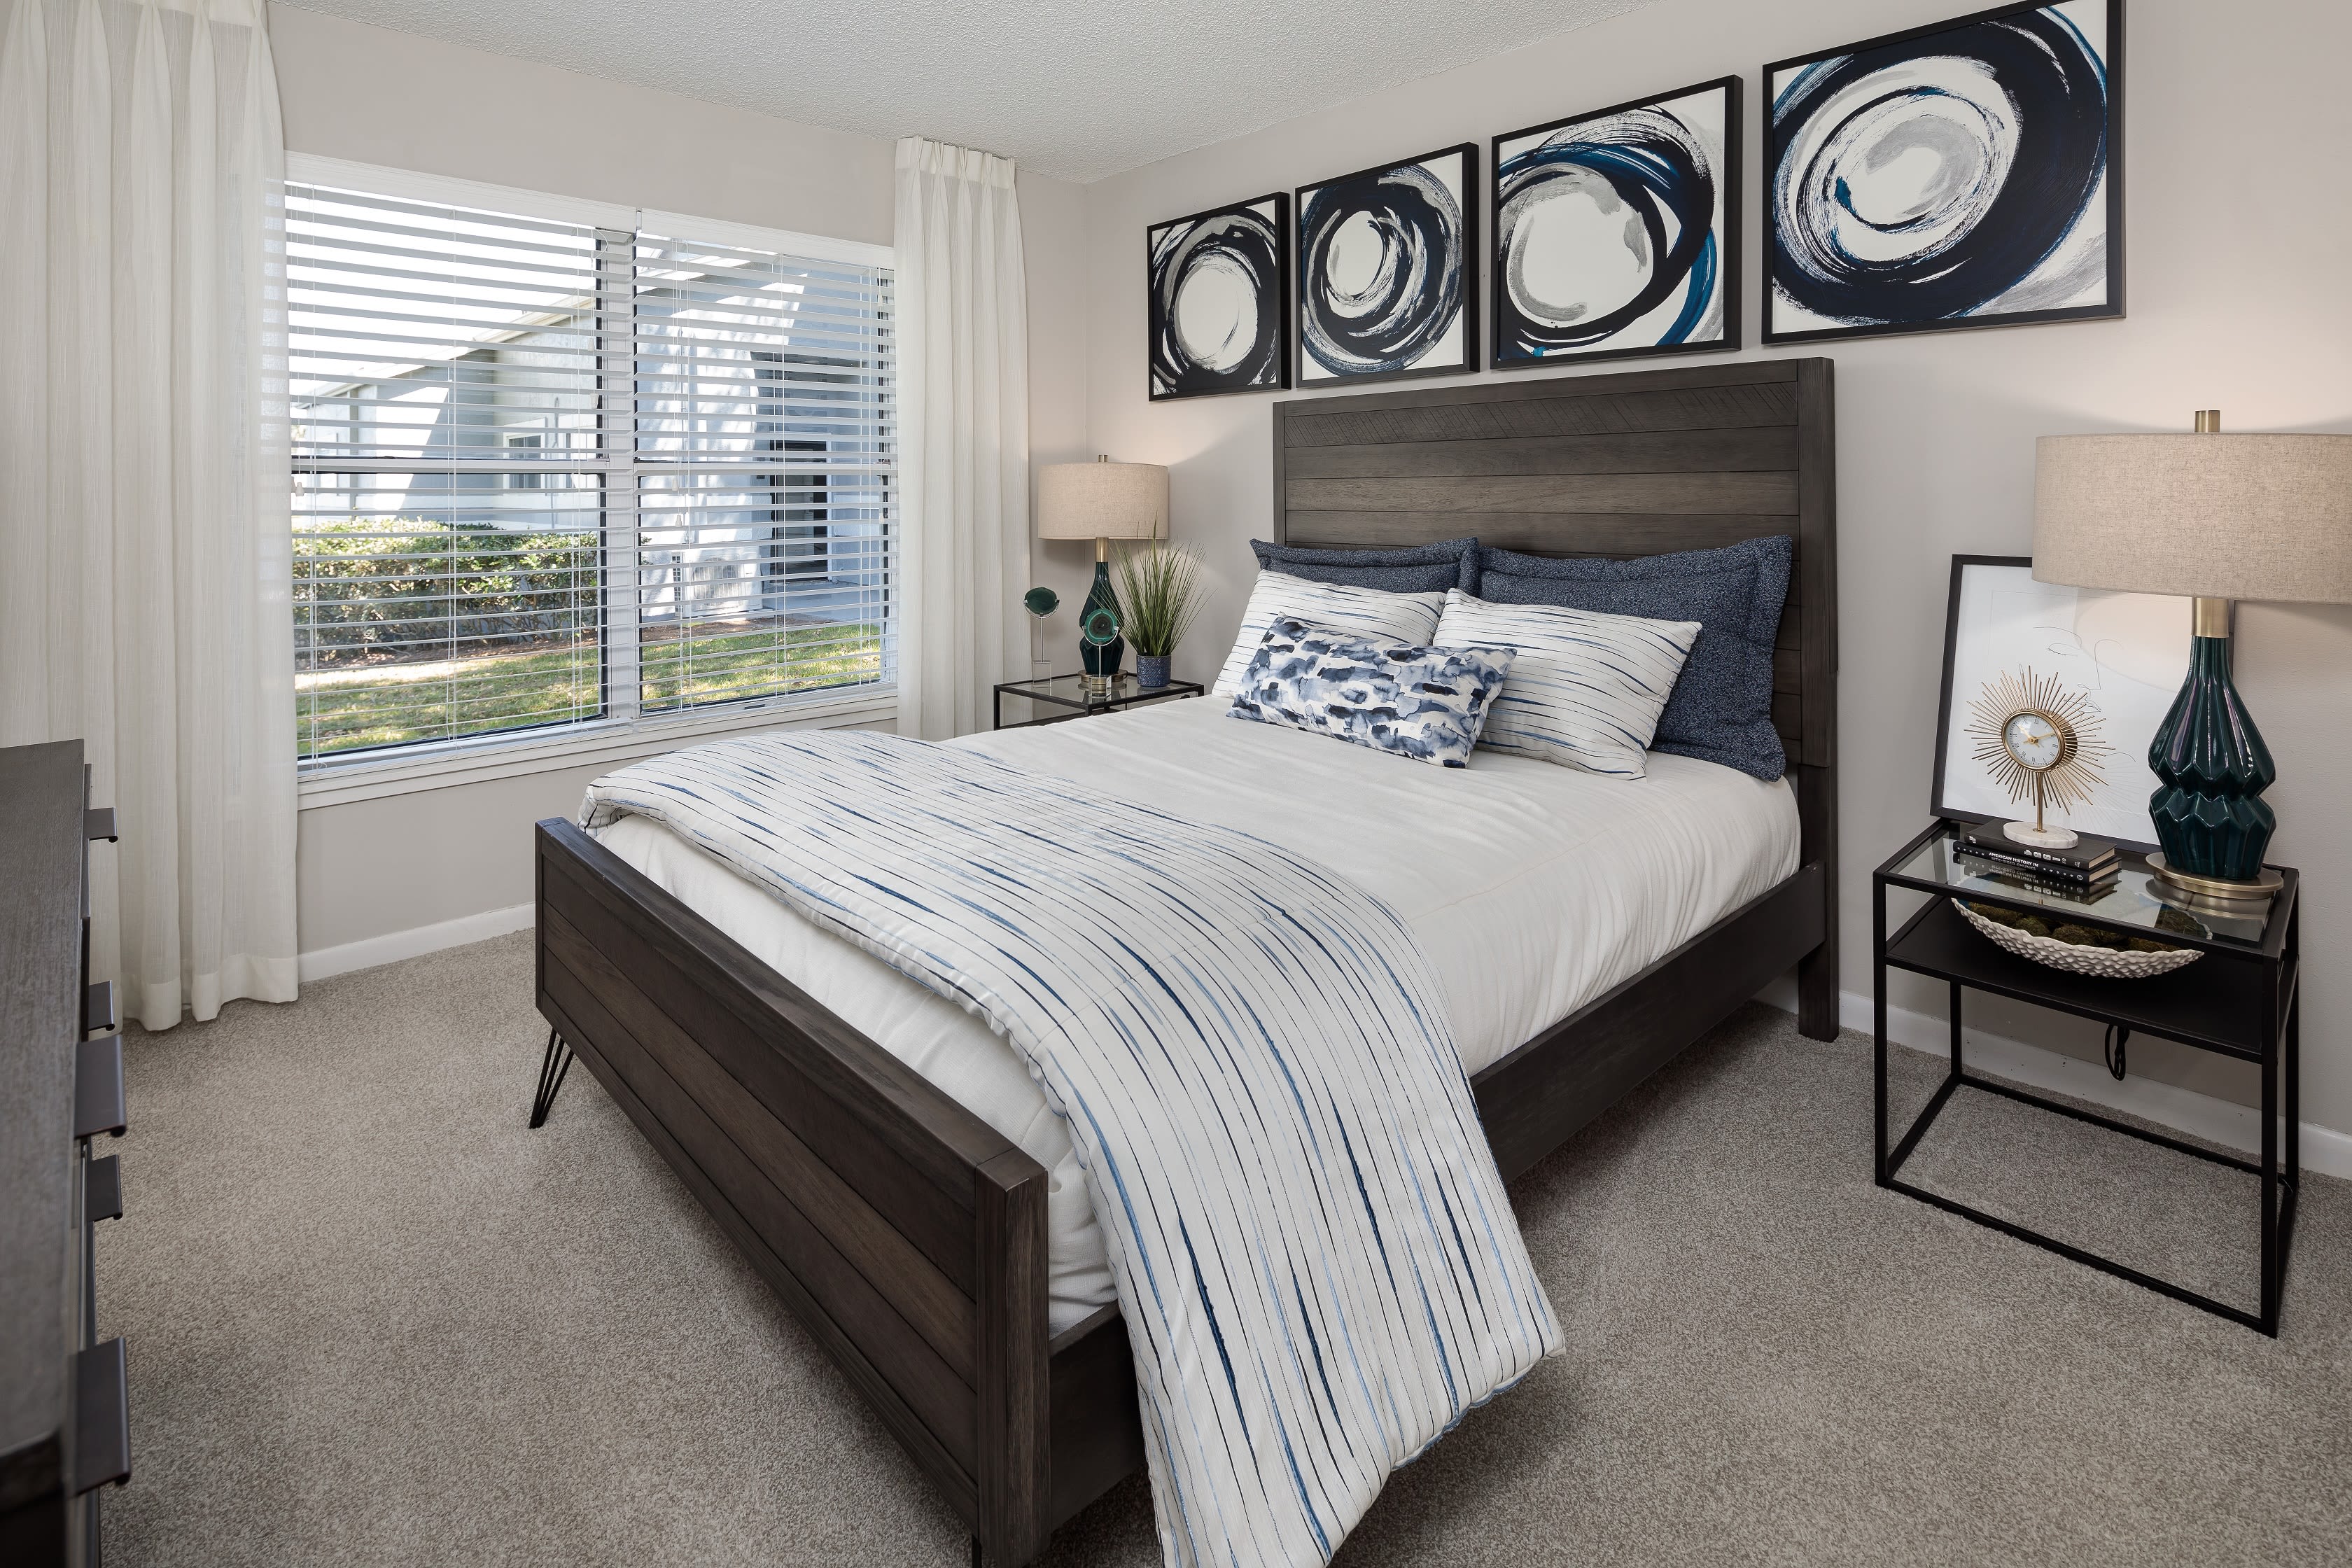 A furnished apartment bedroom at Onyx Winter Park in Casselberry, FL